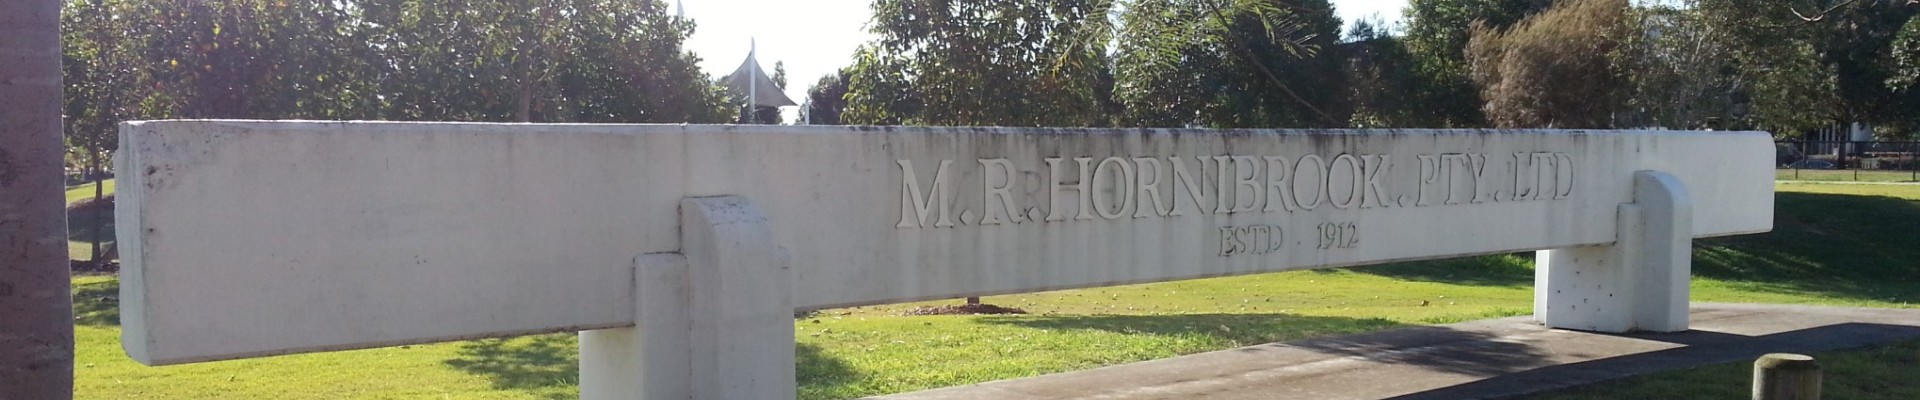 The archway of old Hornibrook Entrance Gates at Bulimba Works now placed at the entrance to a park on the previous site